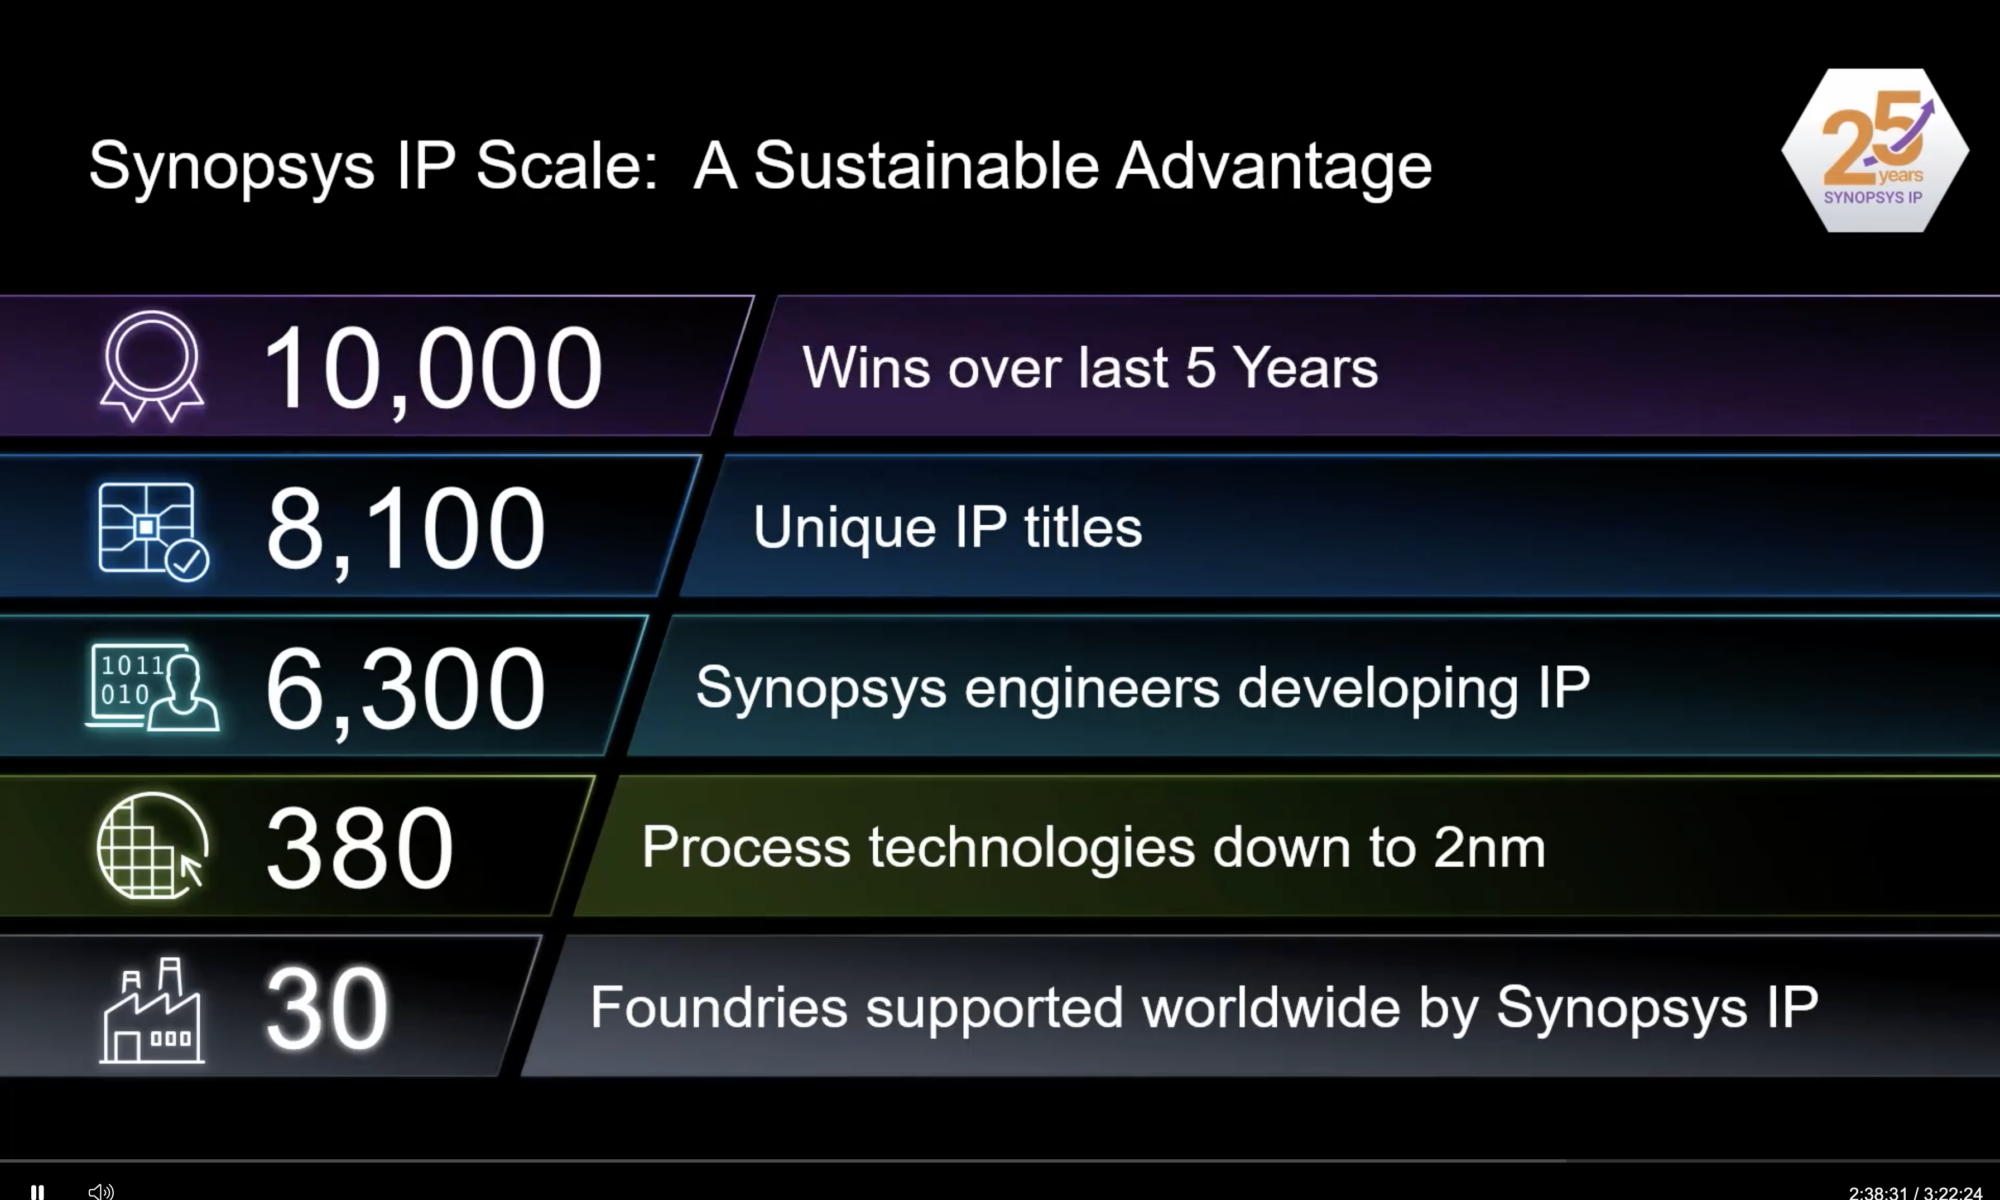 Synopsys IP Scale, a Sustainable Advantage